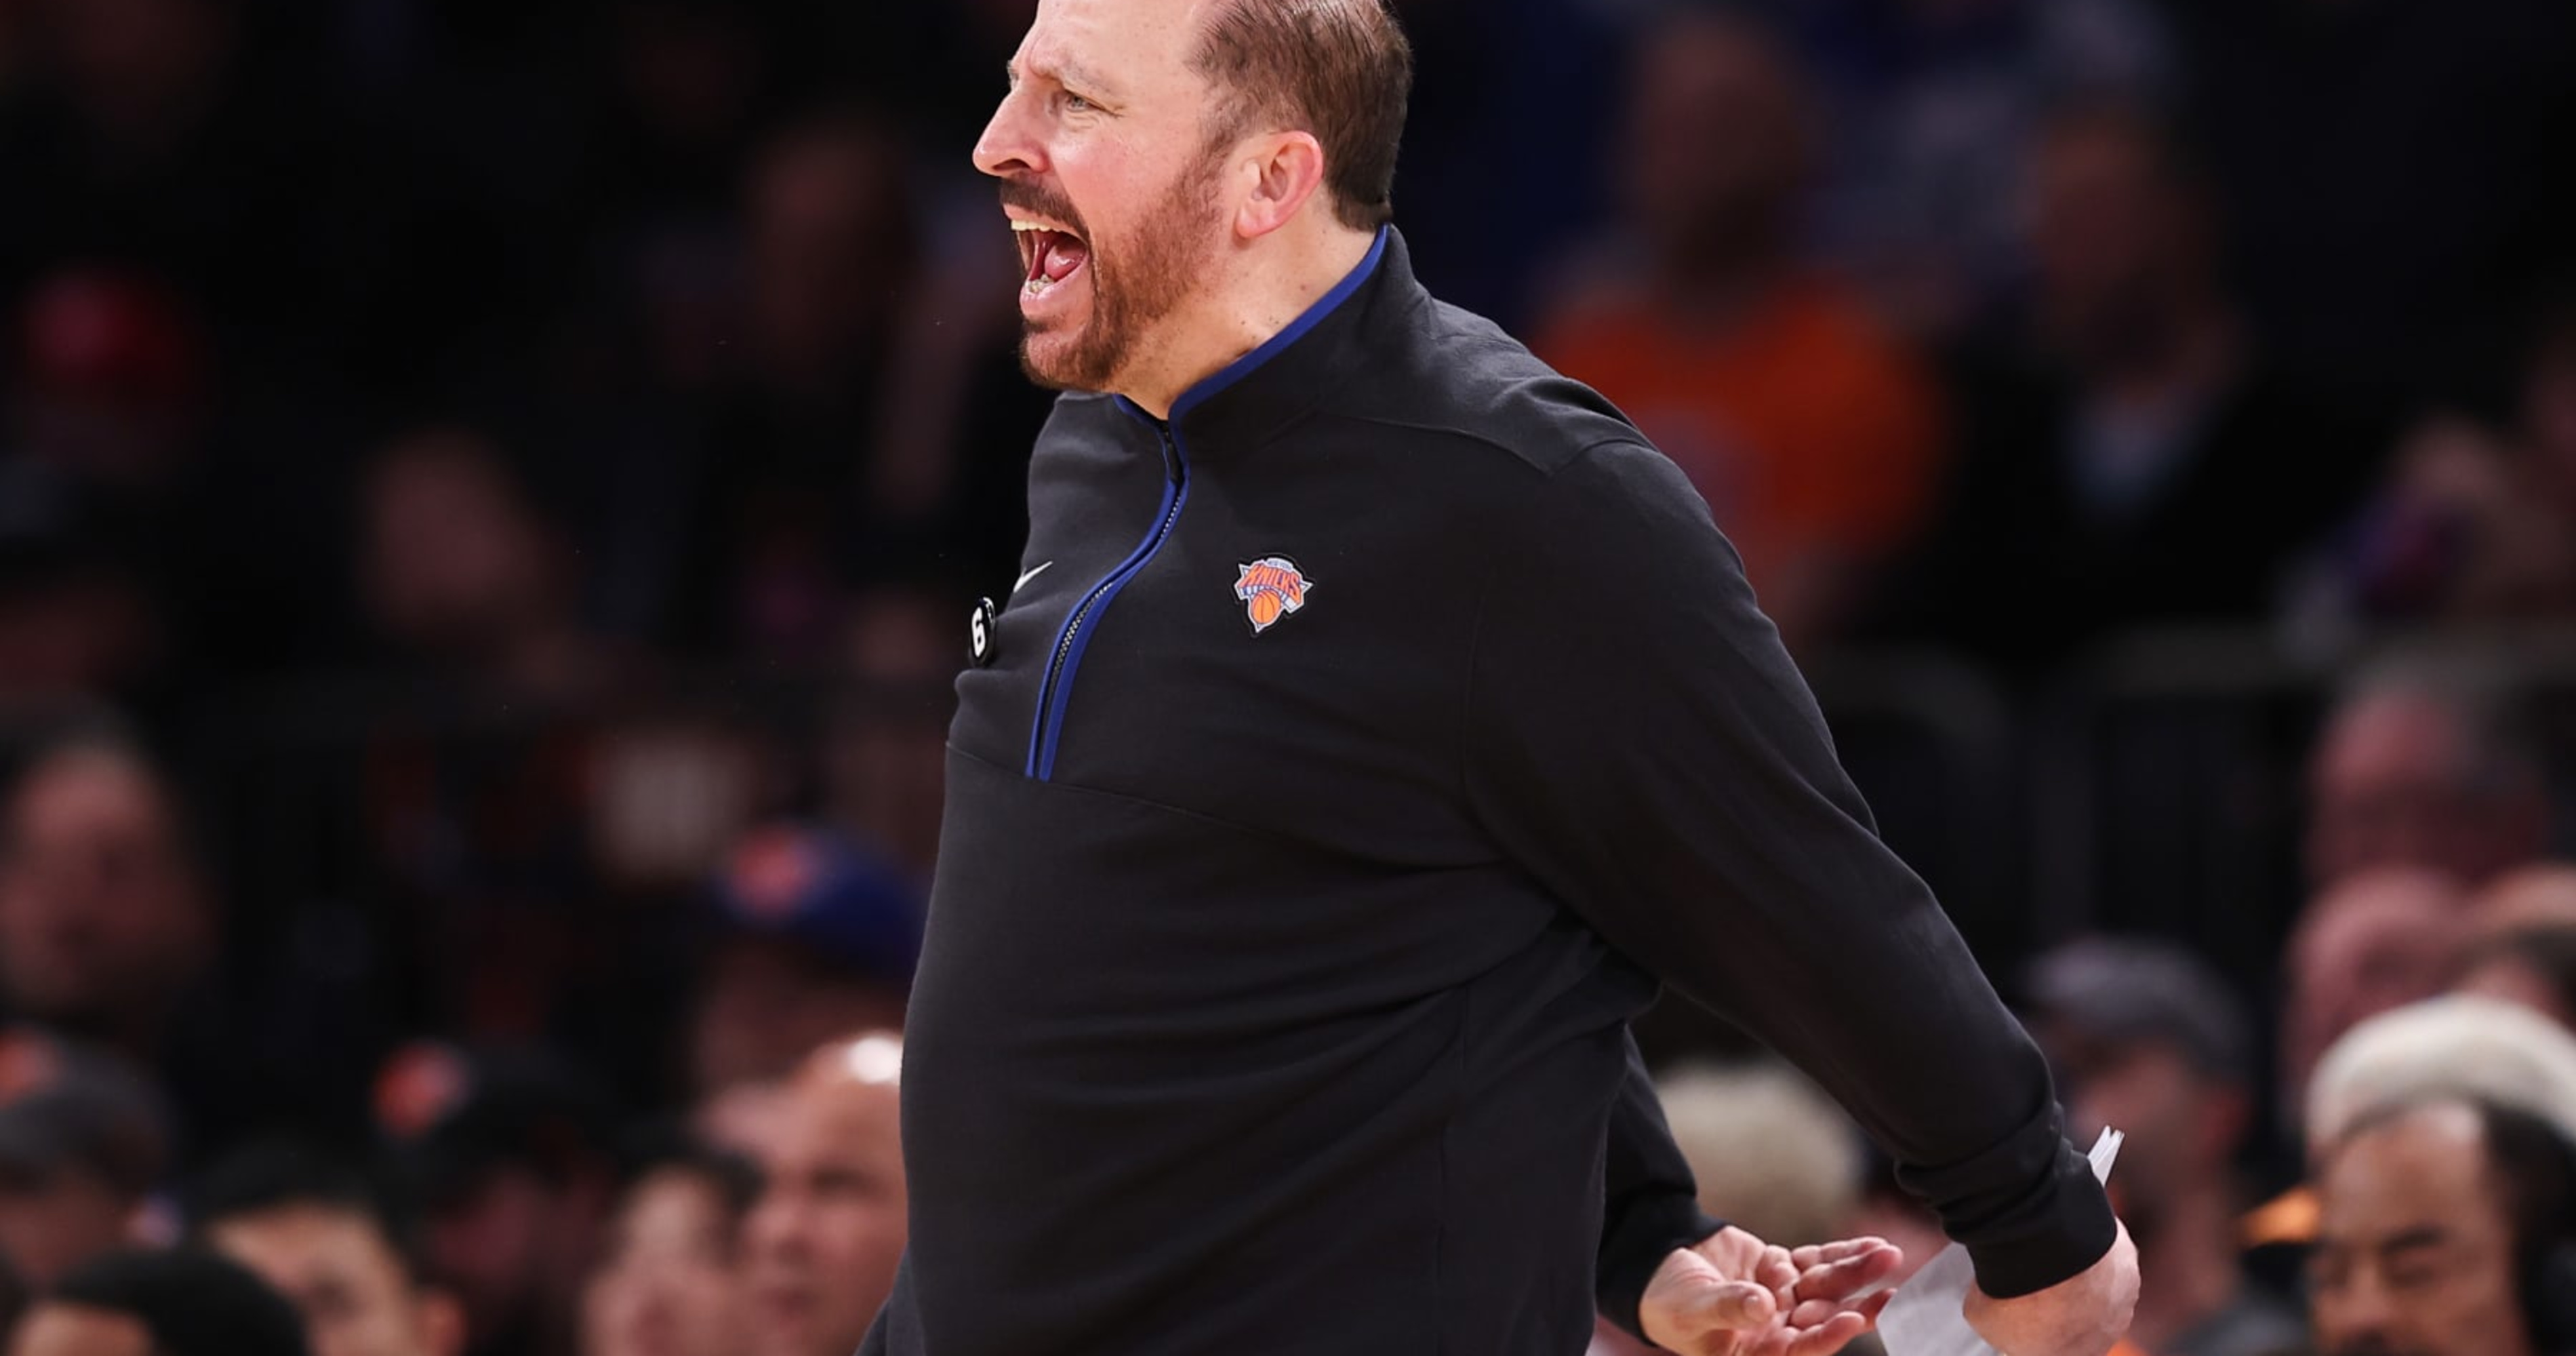 It's Time for the New York Knicks to Fire Tom Thibodeau